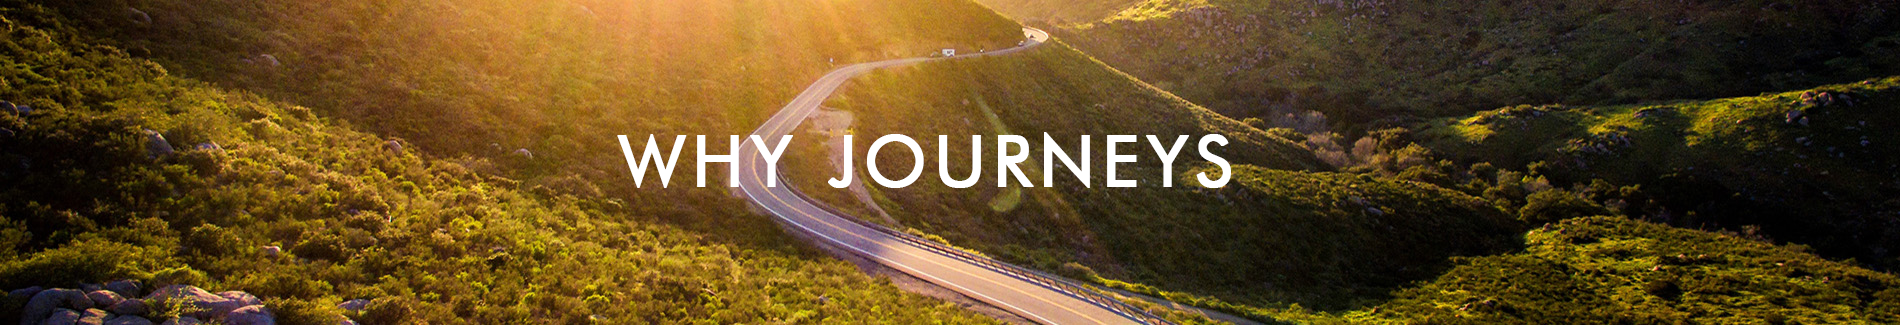 Why_Journeys_Banner